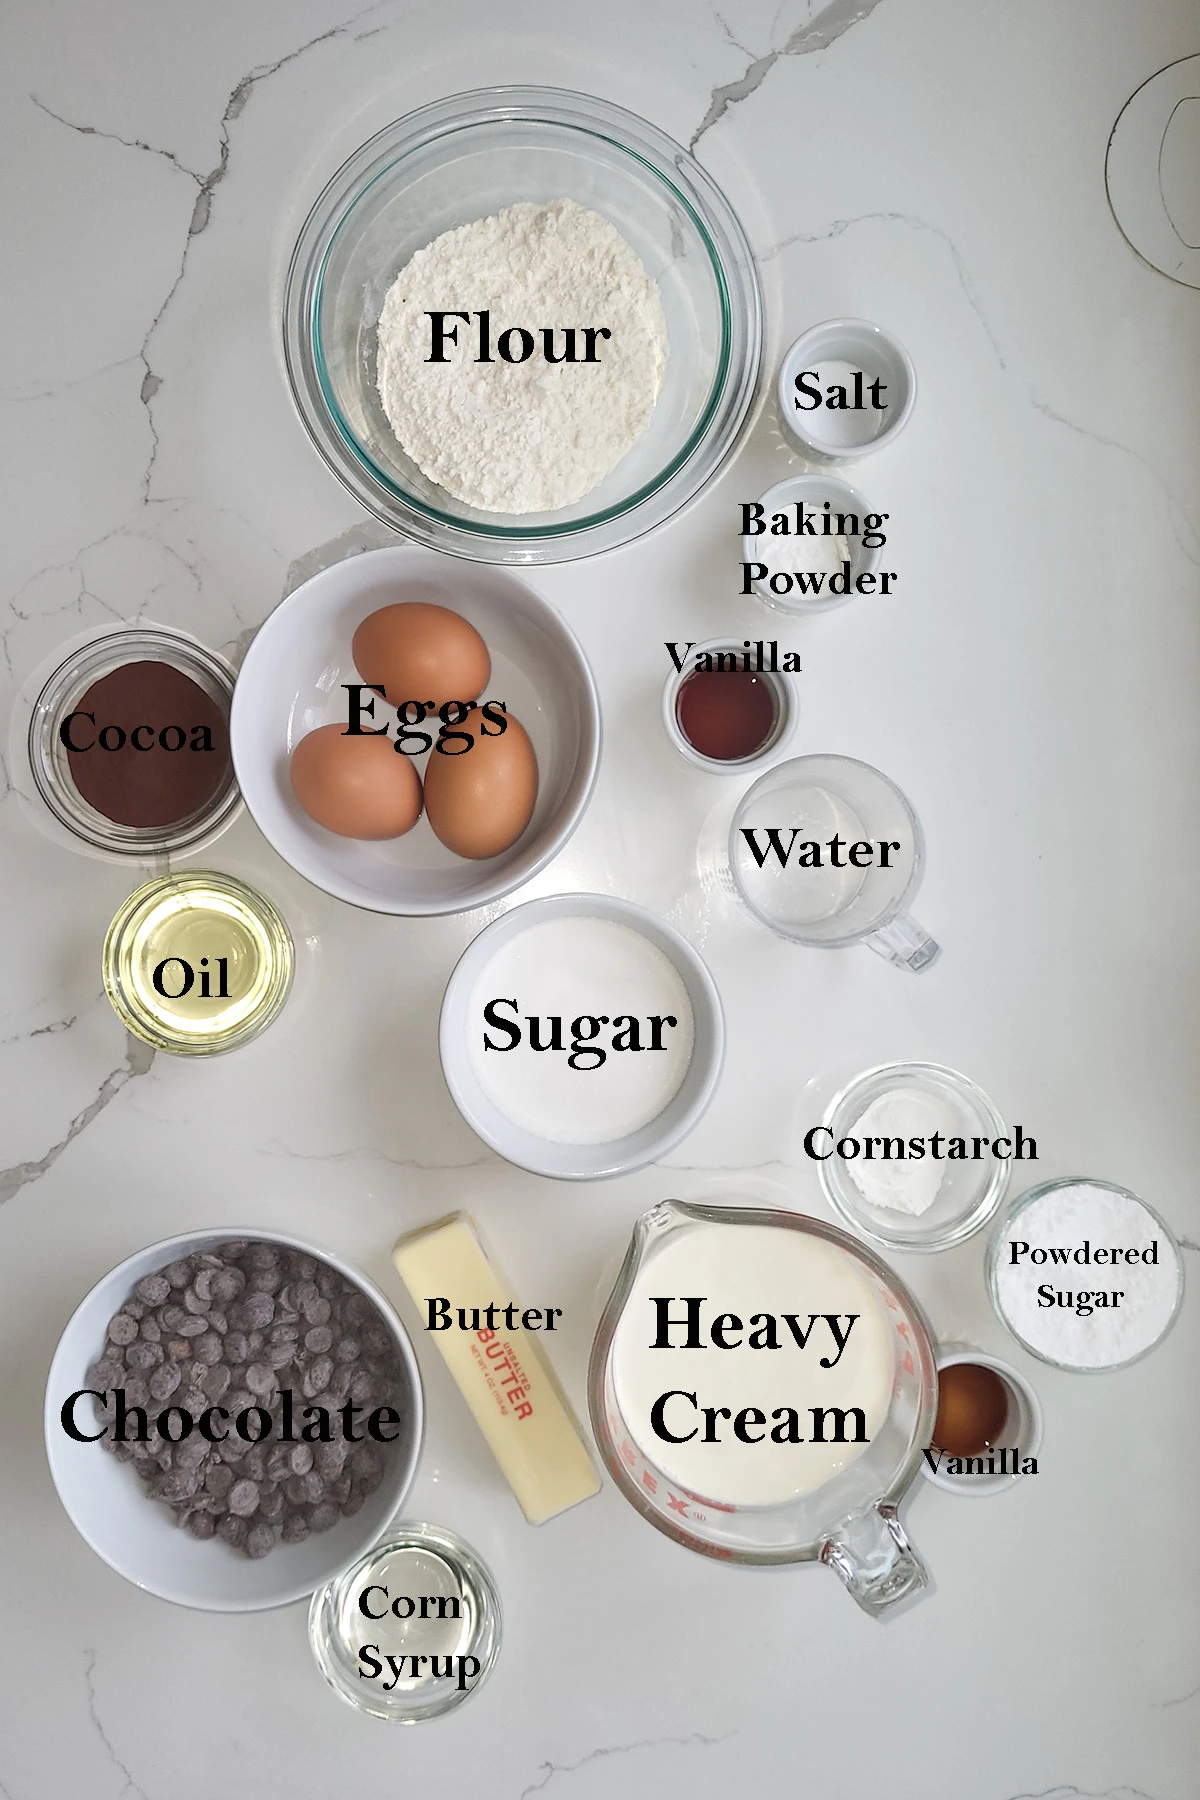 ingredients for chocolate swiss roll cake in bowls on a marble surface.